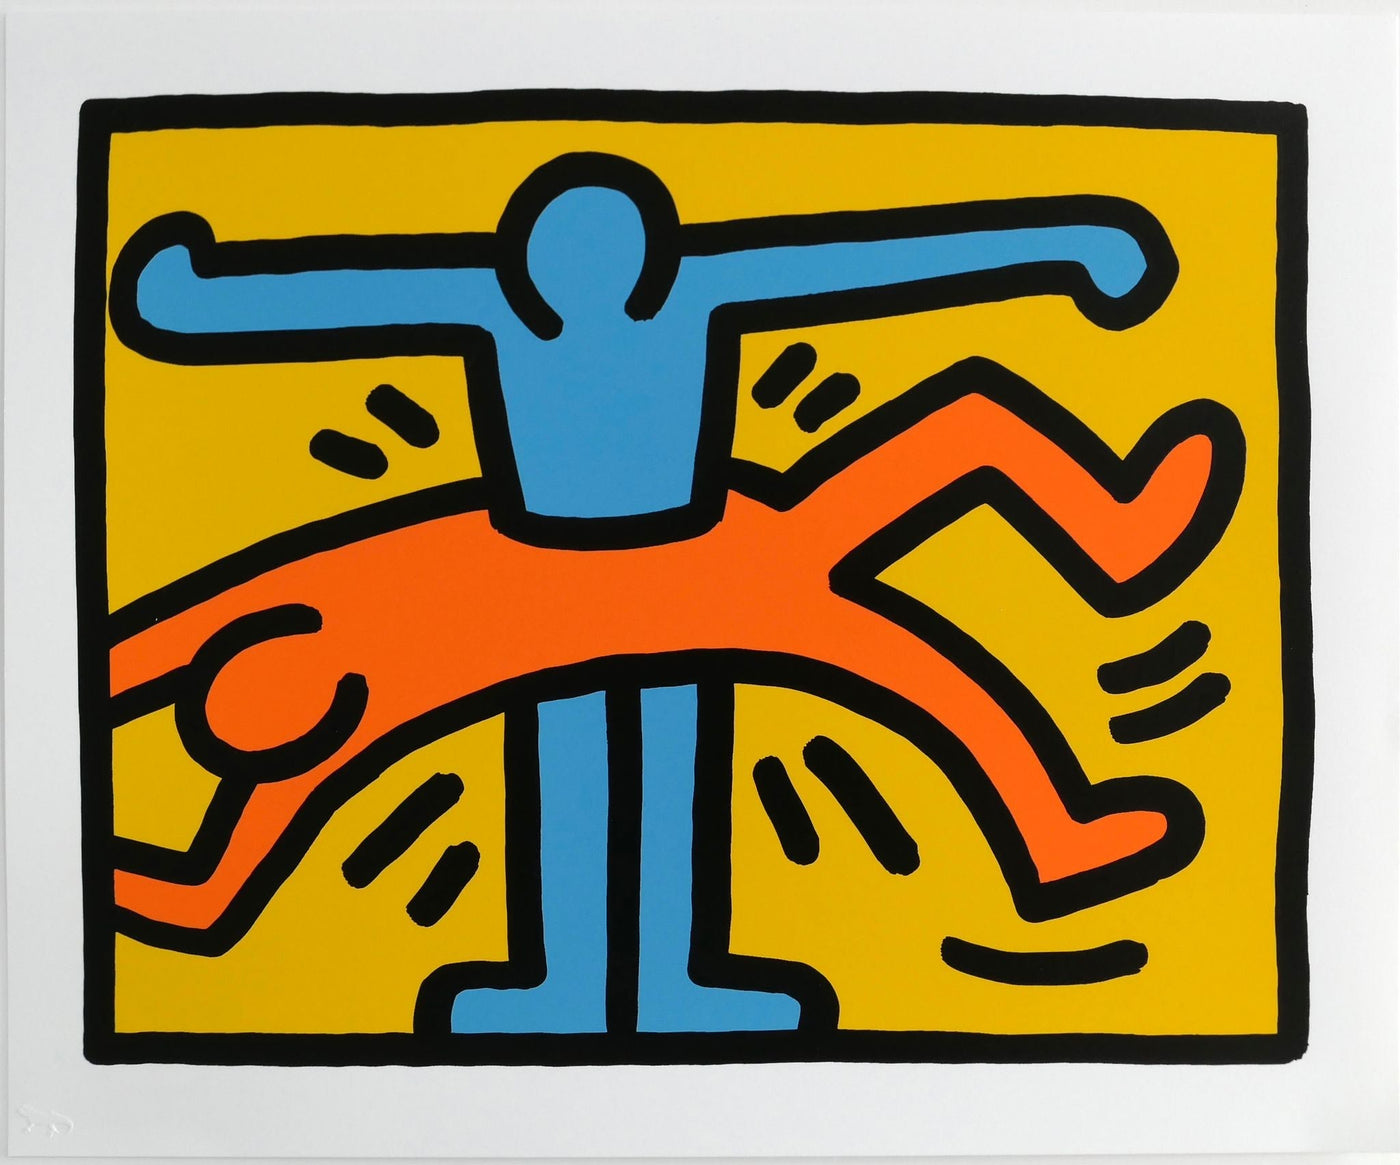 Keith Haring Pop Shop VI Plate 1 (L. PP. 150-51) 1989